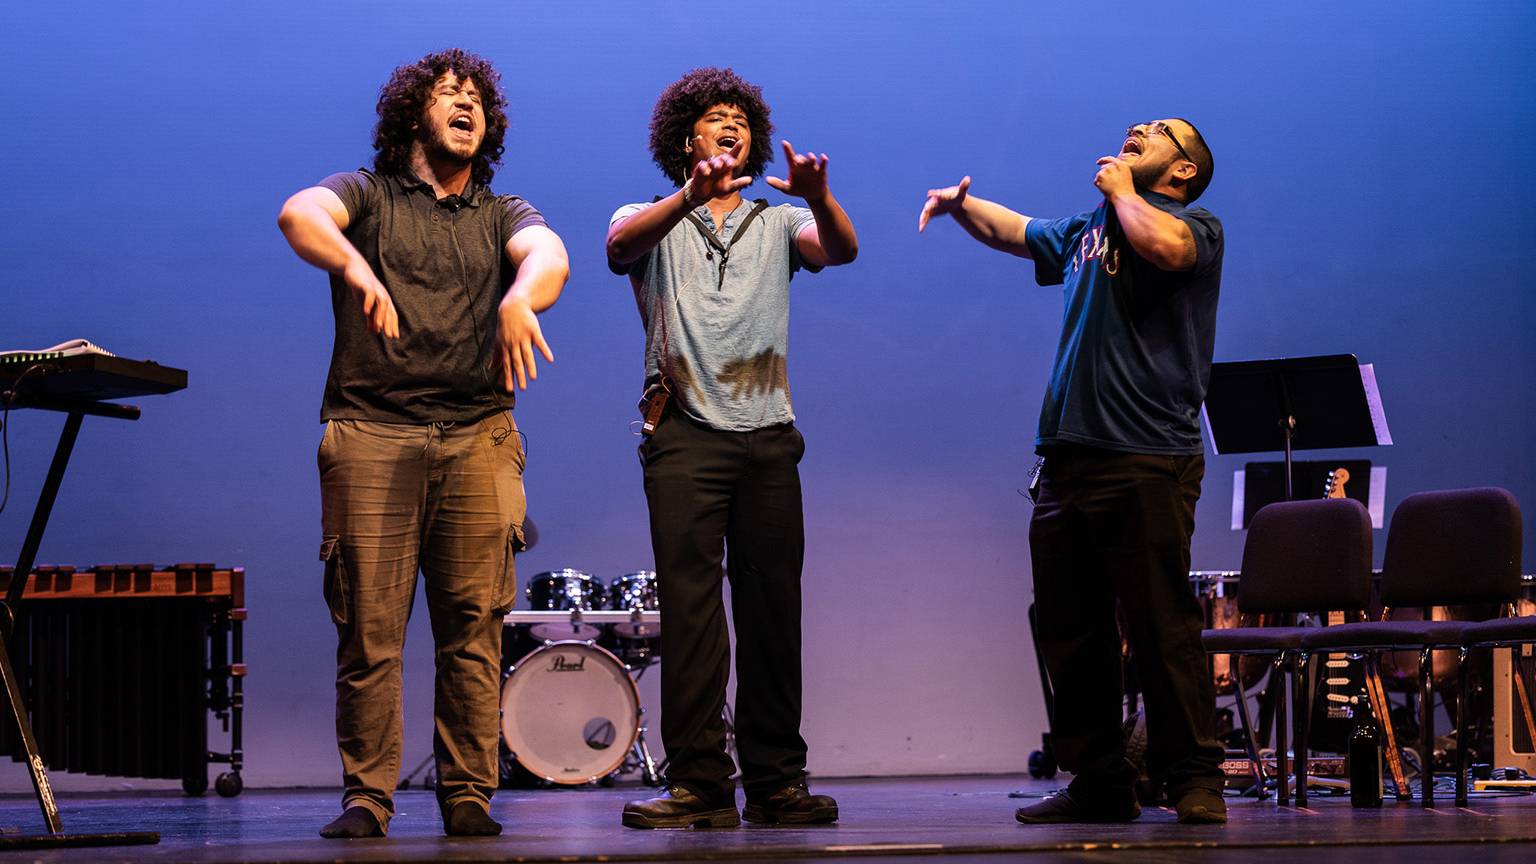 Jay Nava, left, performs on stage during his hip-hop opera with two other performers.